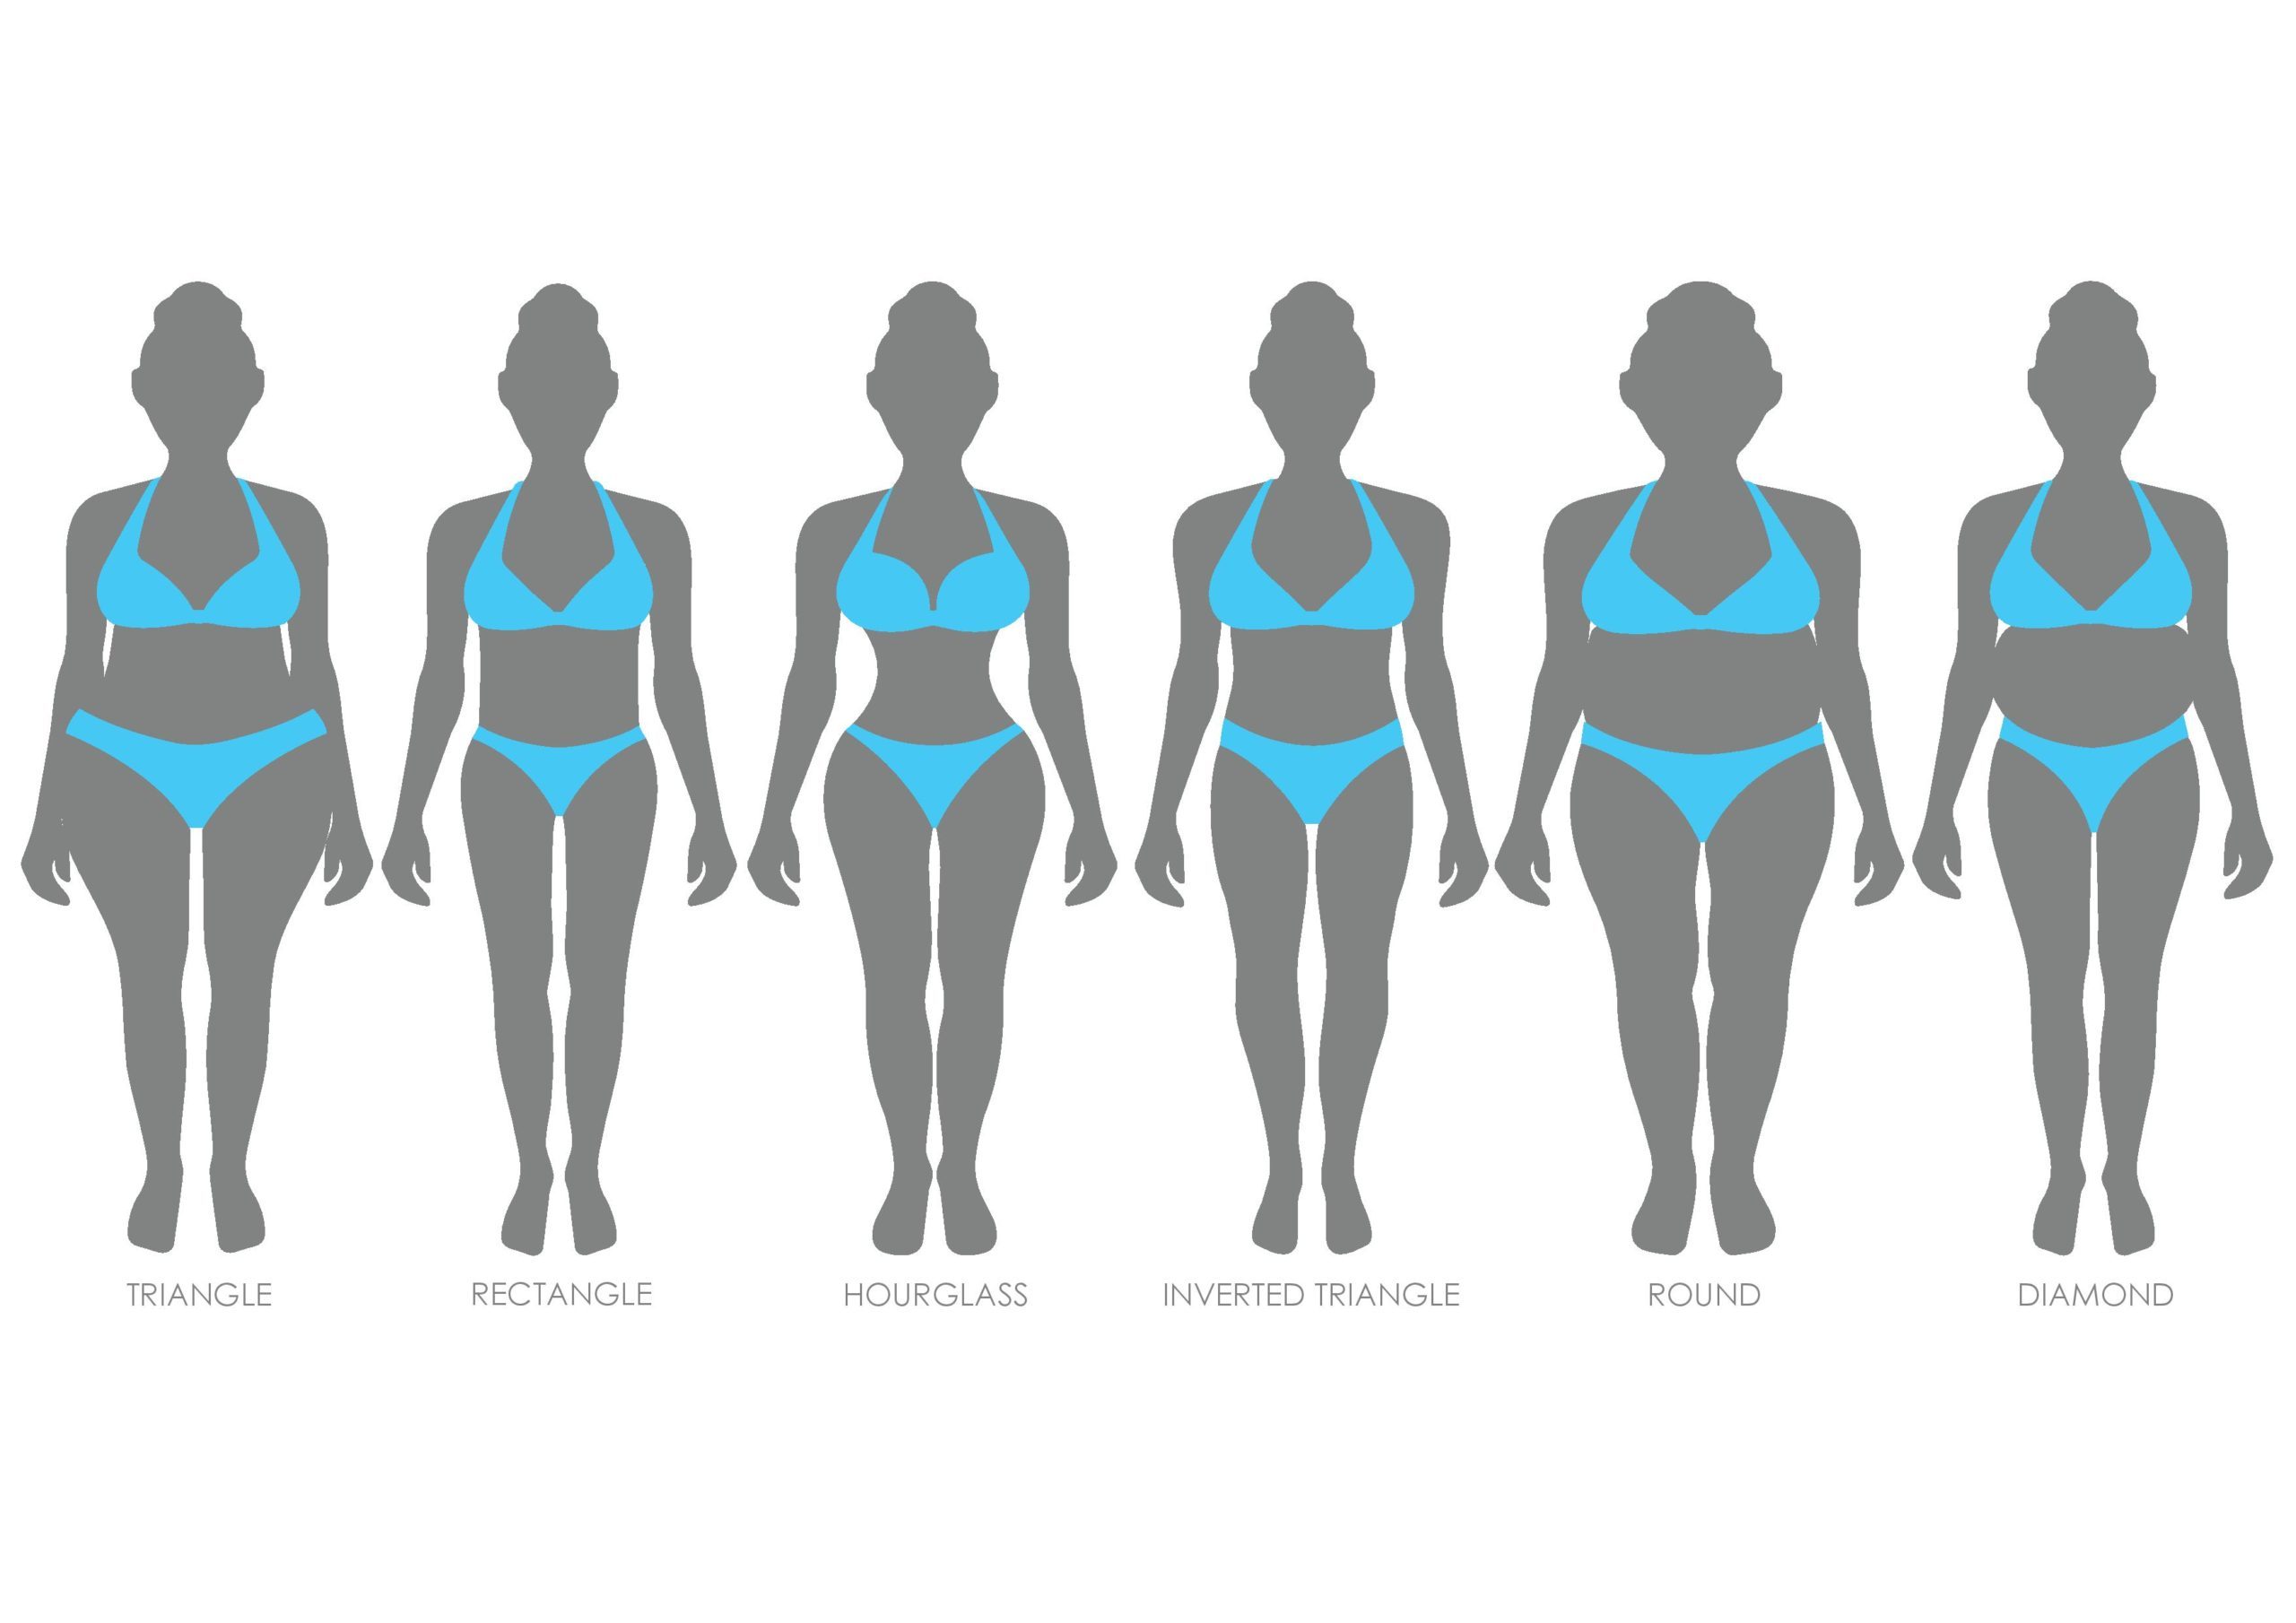 Did you know there are 12 different body shapes a woman can have